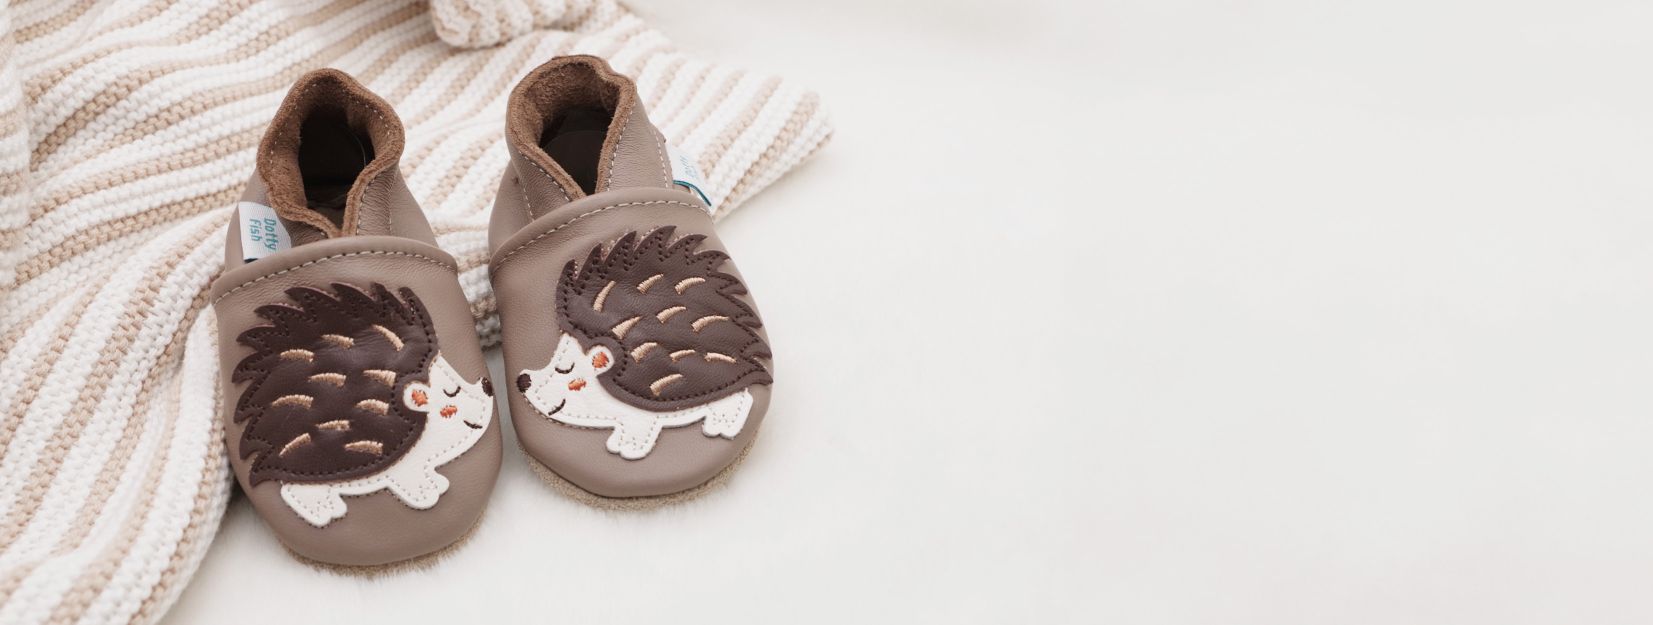 New 'little pickle' Hedgehog Baby Shoes from Dotty Fish 